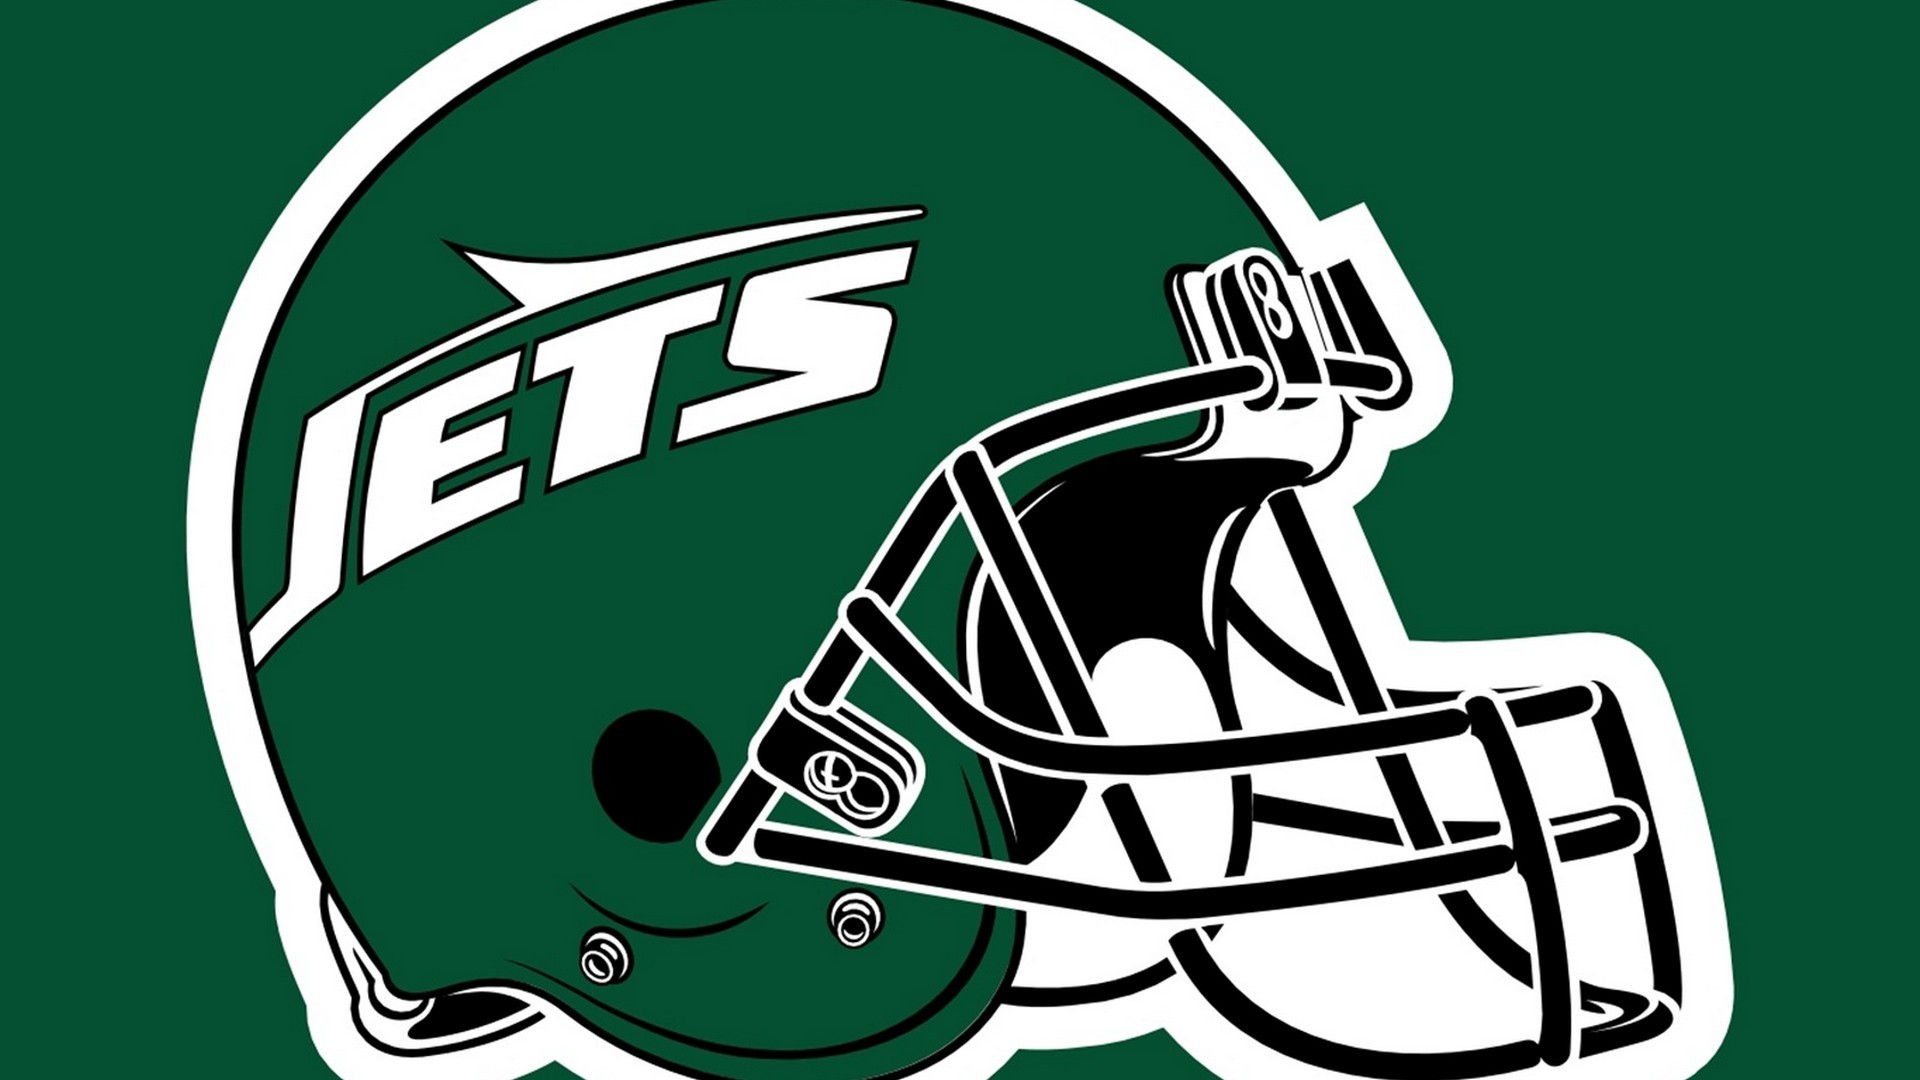 1920x1080 New York Jets Desktop Wallpapers with resolution  pixel. You can  make this wallpaper for